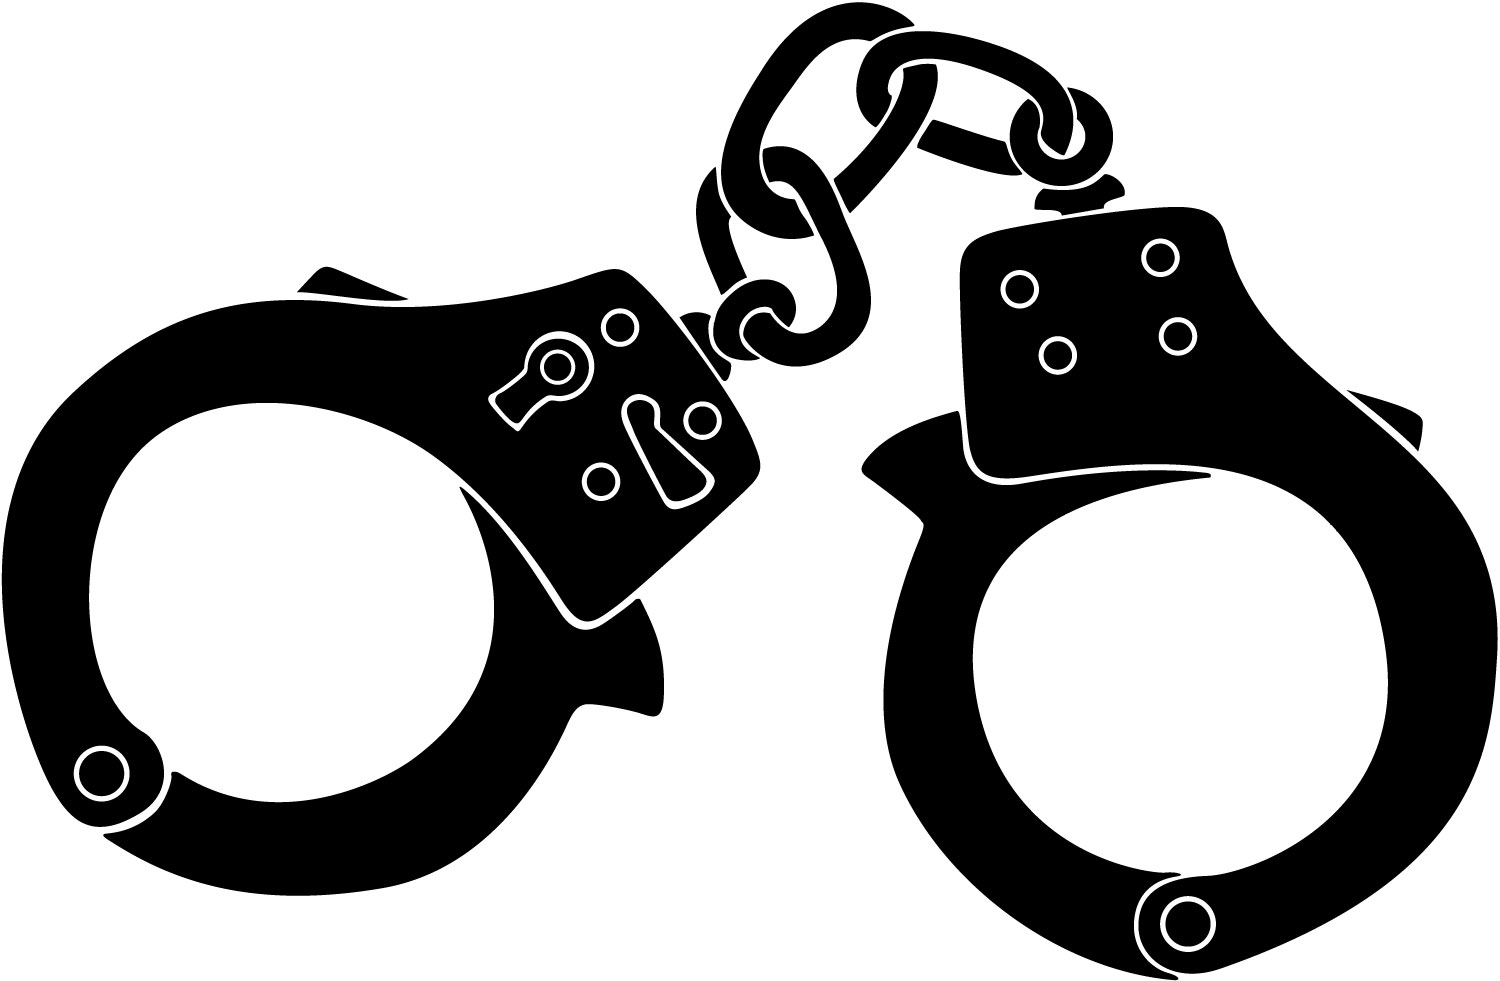 Handcuffs clipart item. Free pic of download